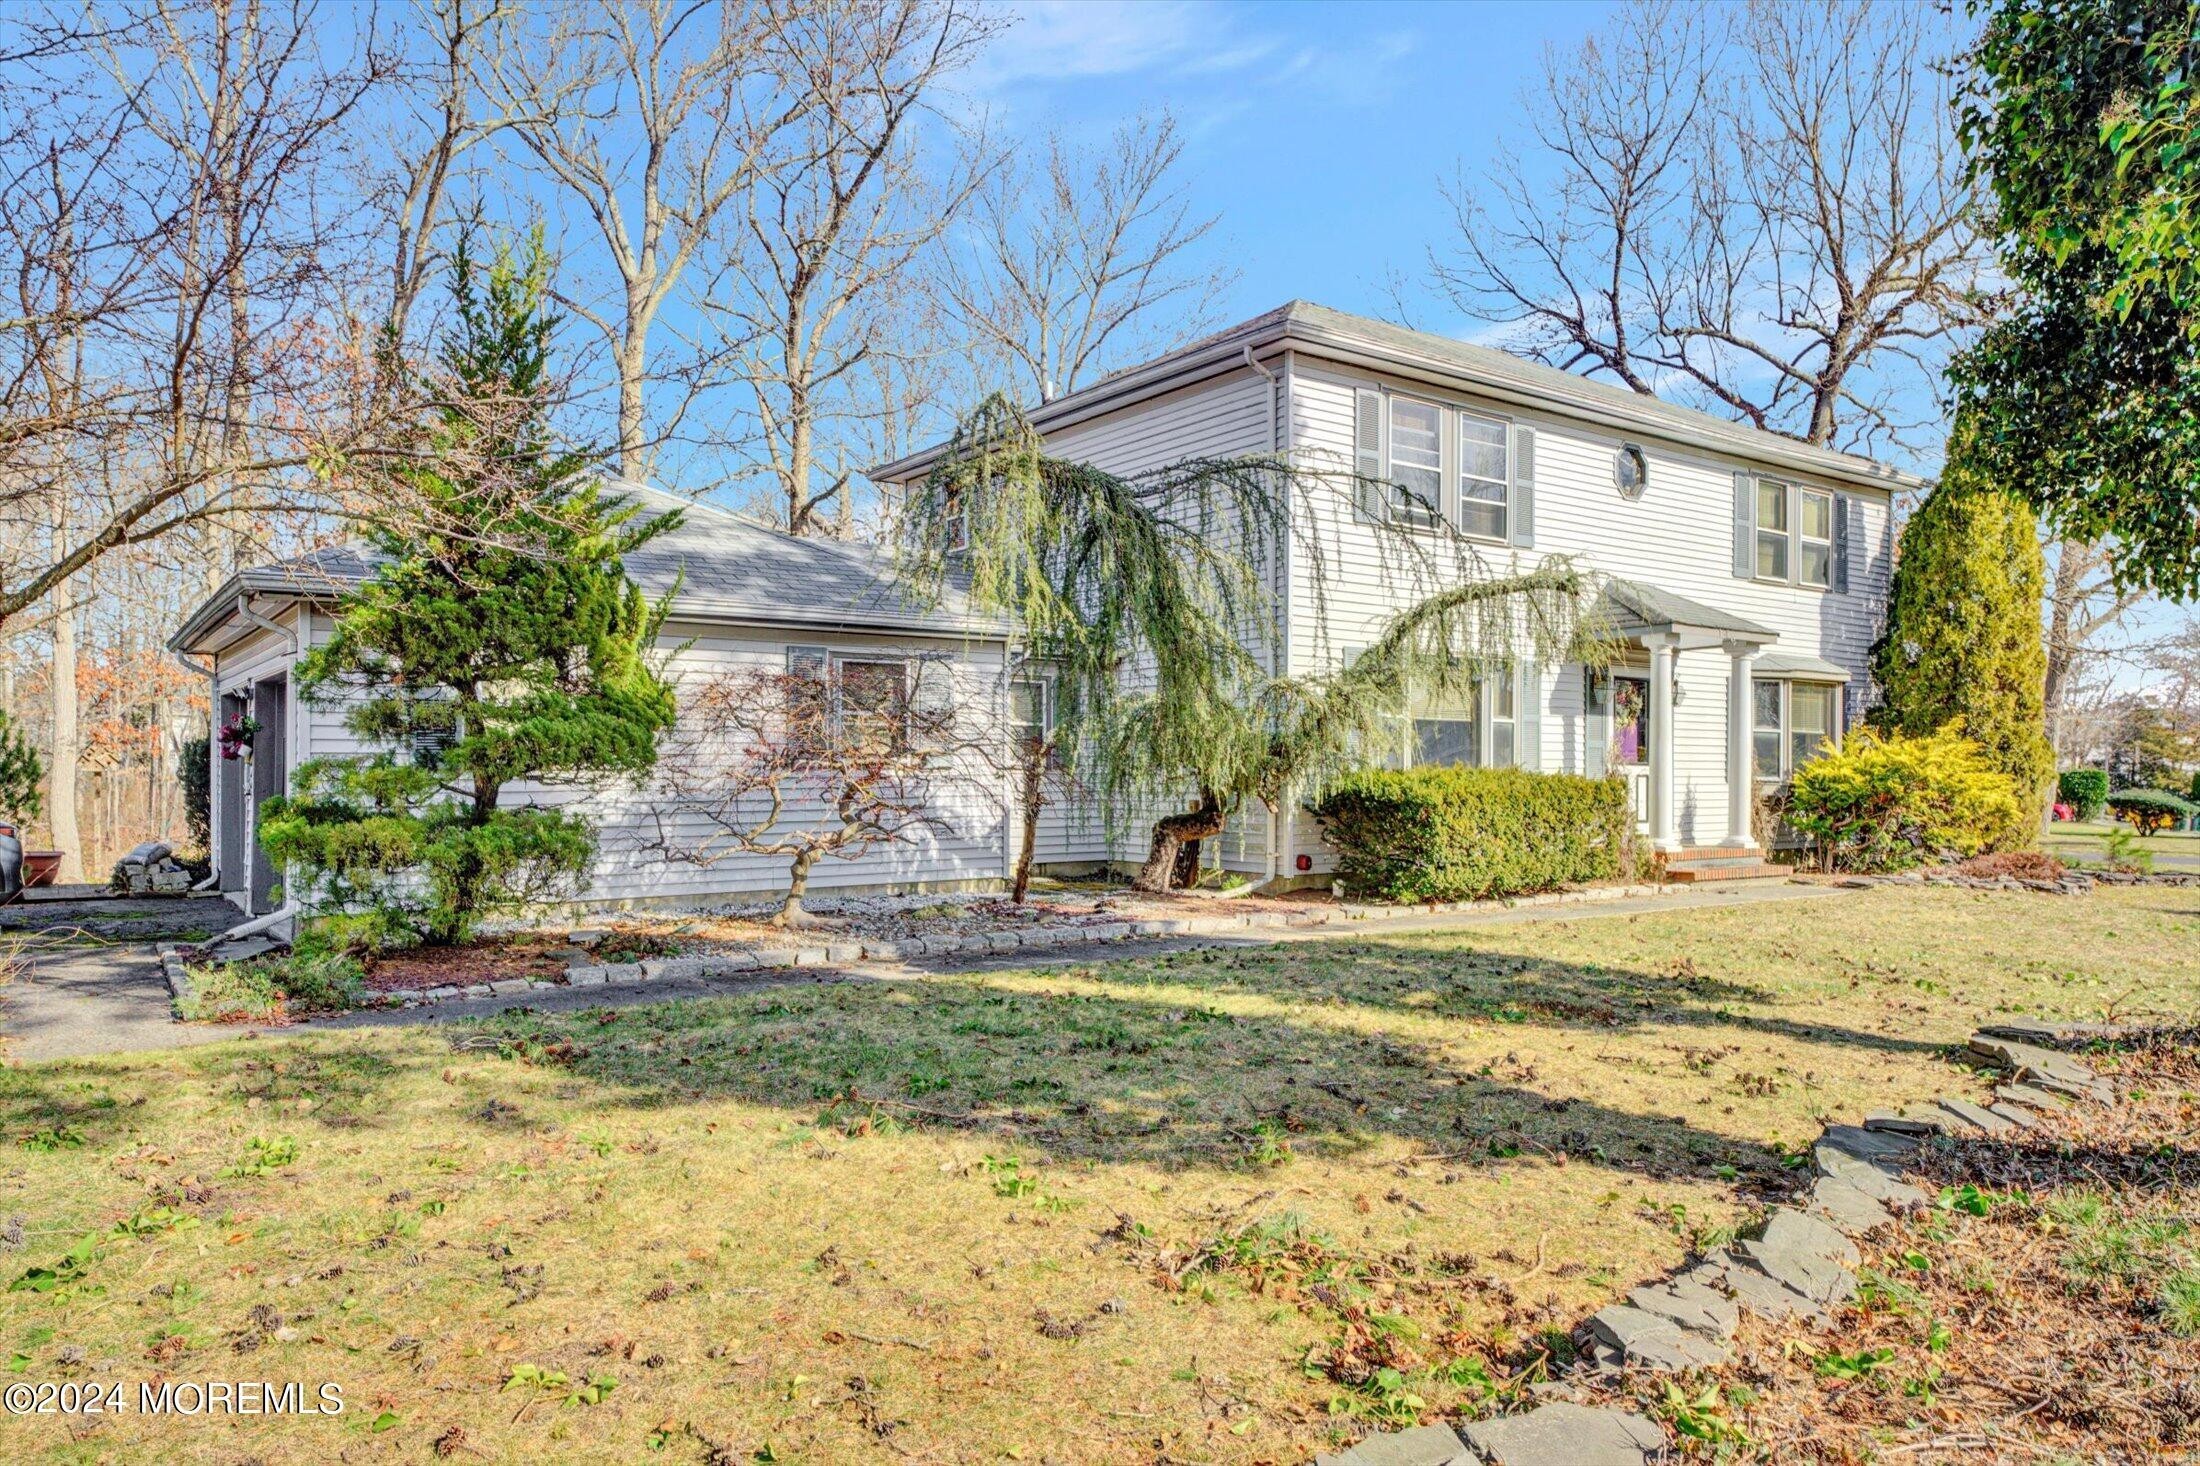 2. 145 Colonial Drive